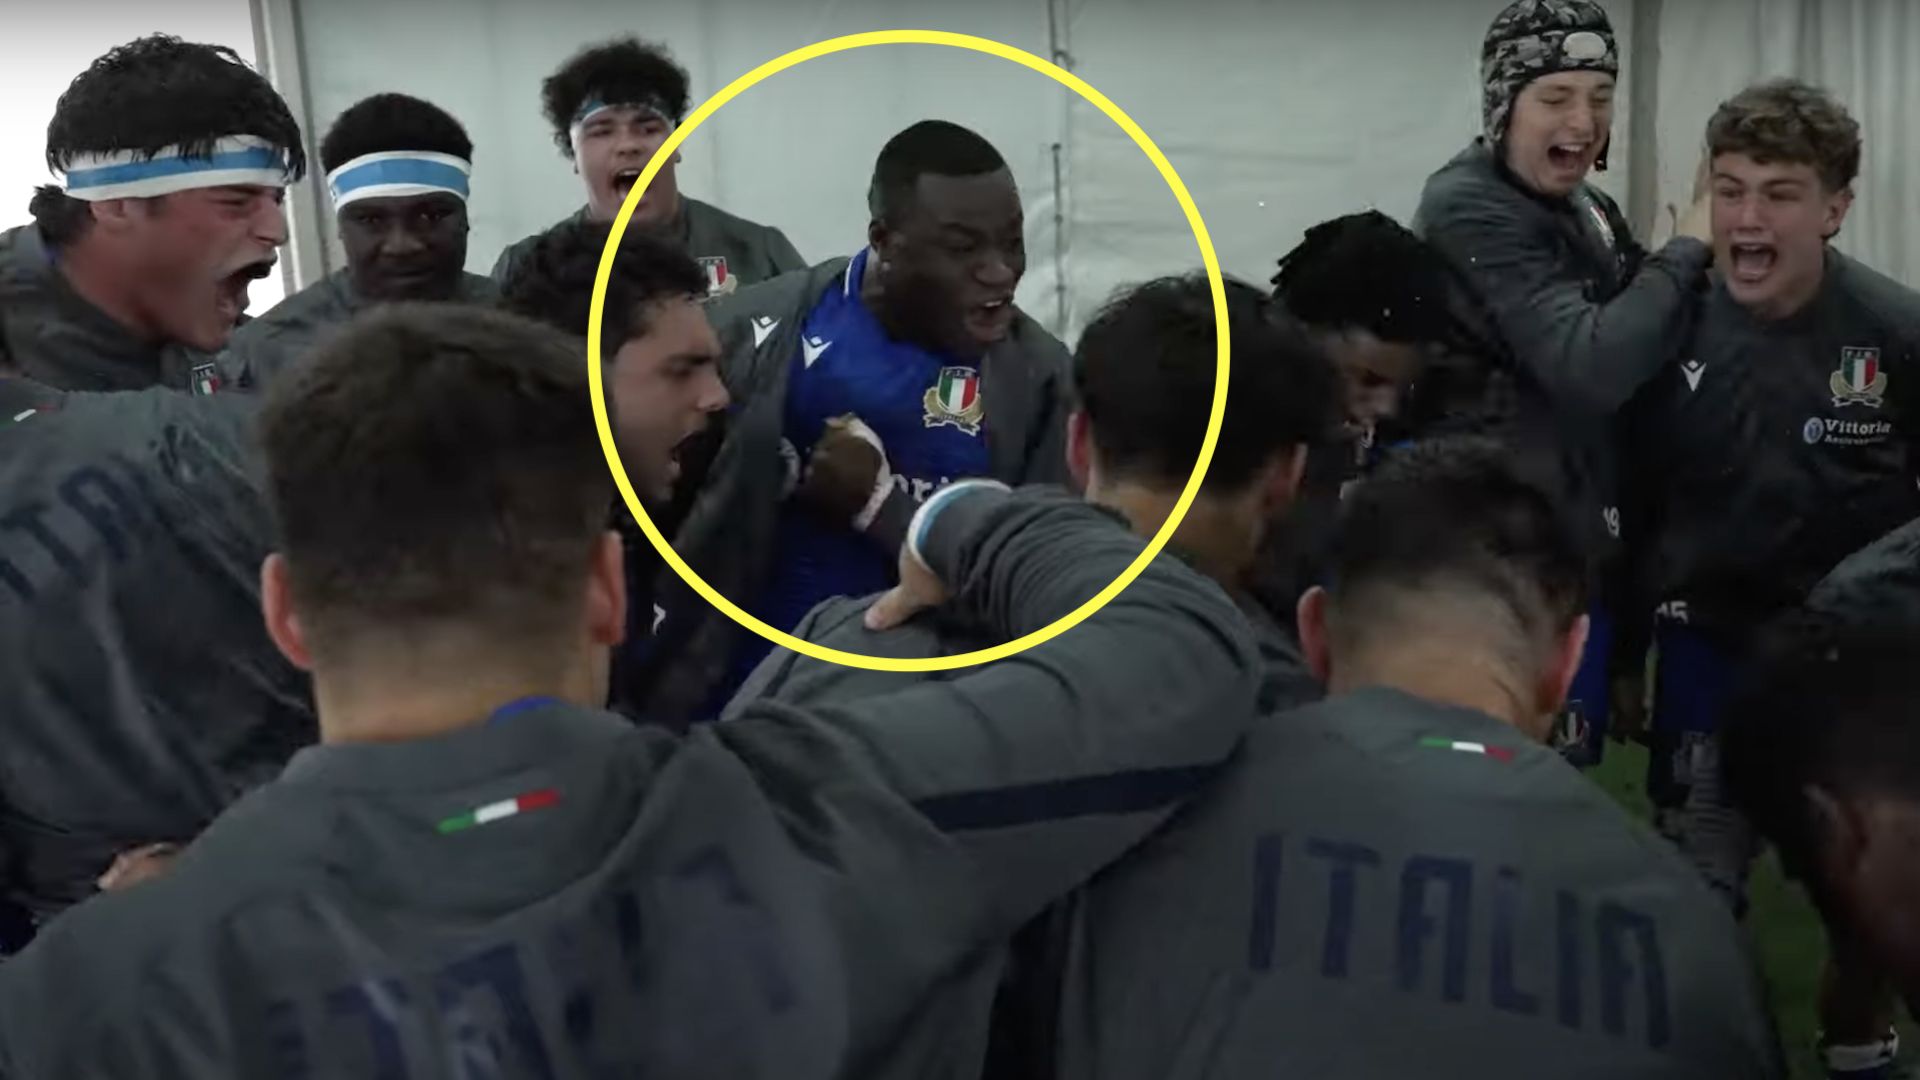 Italy captain's all time great team talk at U20 Championship goes viral